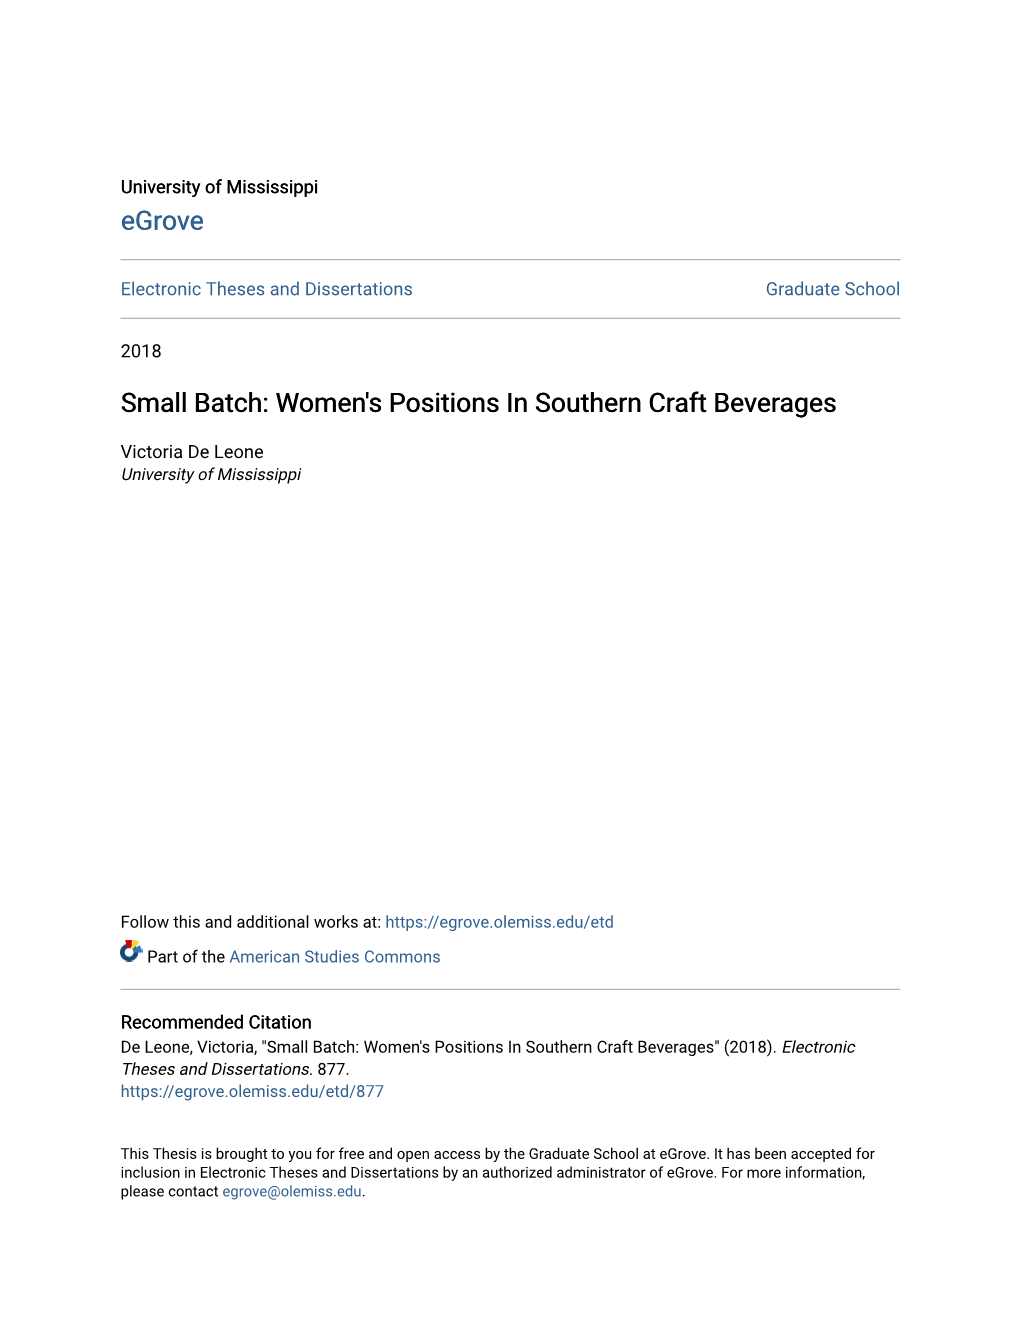 Small Batch: Women's Positions in Southern Craft Beverages